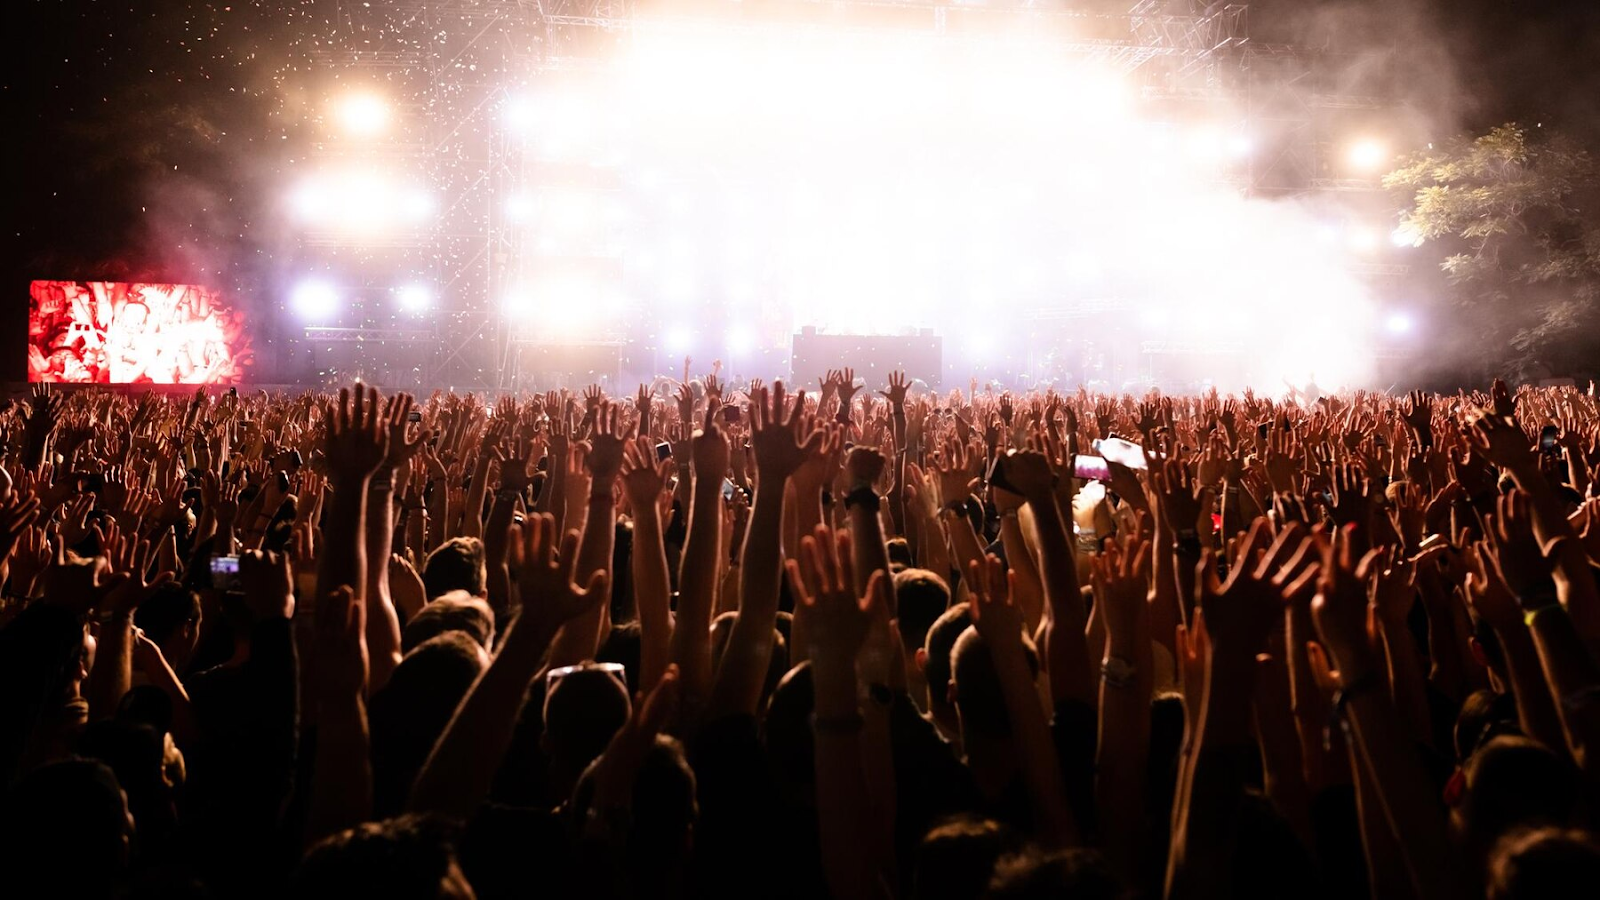 Excited people with arms raised up during a music festival.